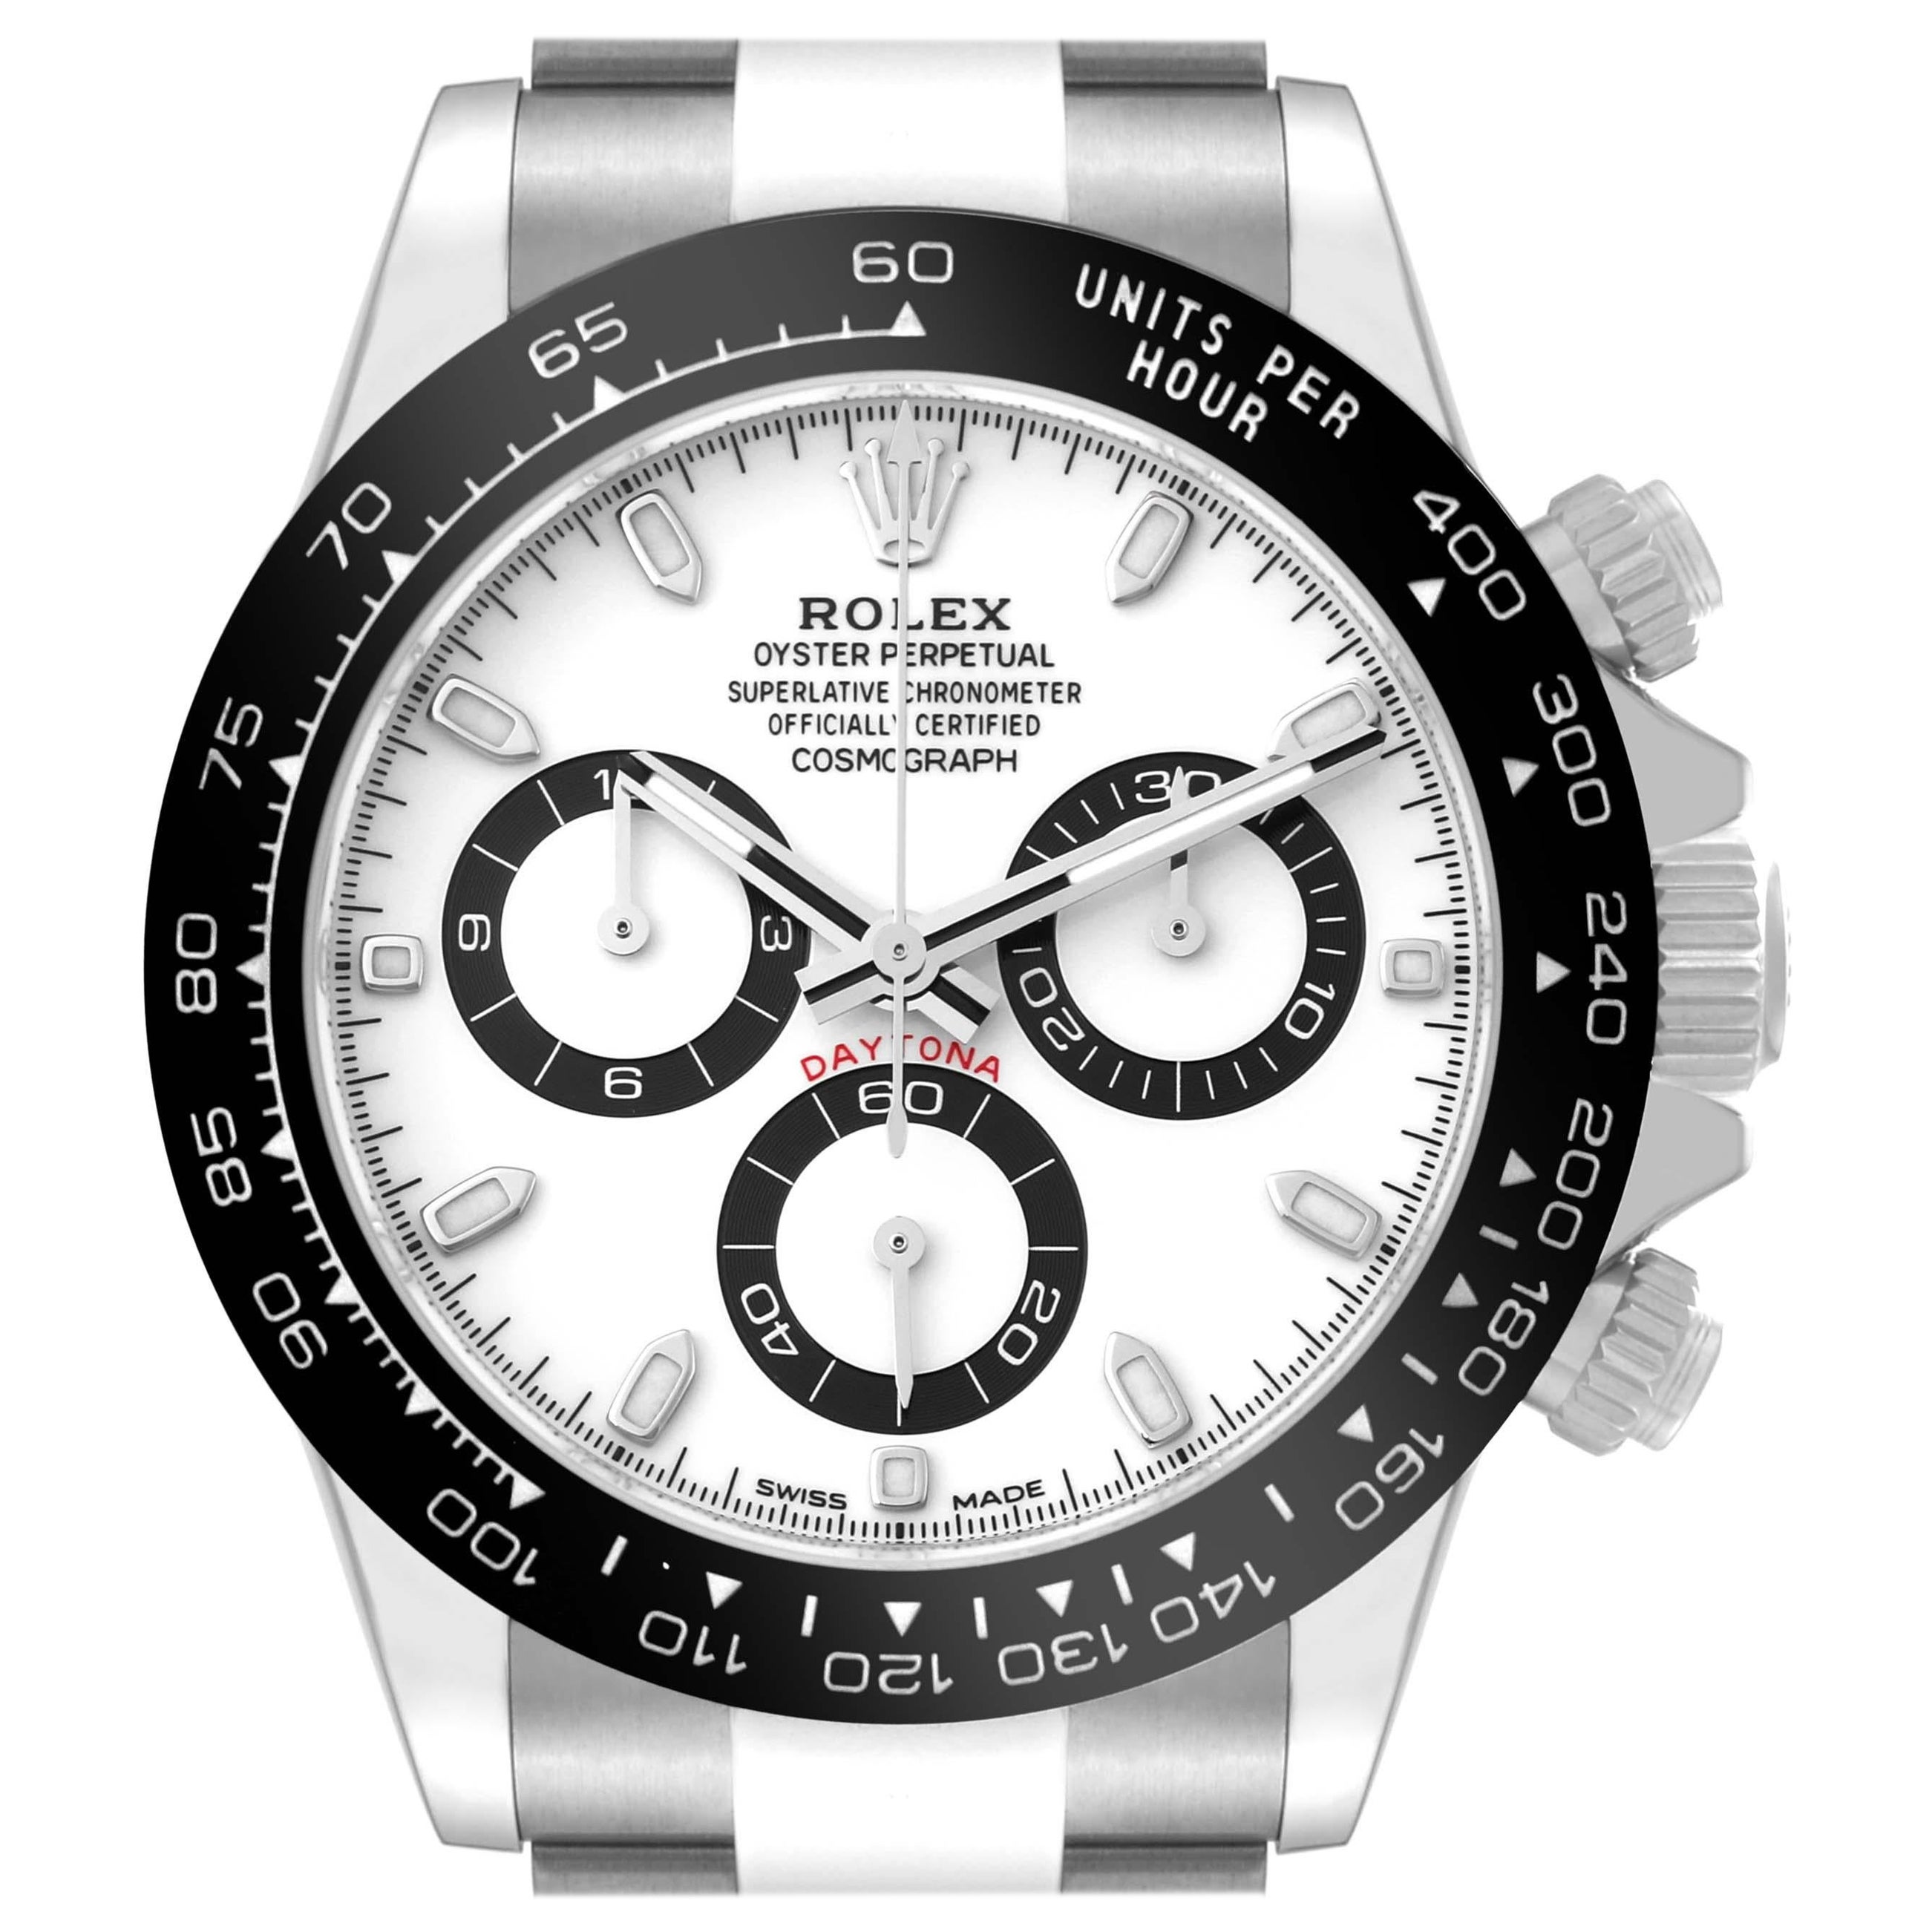 What are the three dials on a Rolex Daytona?